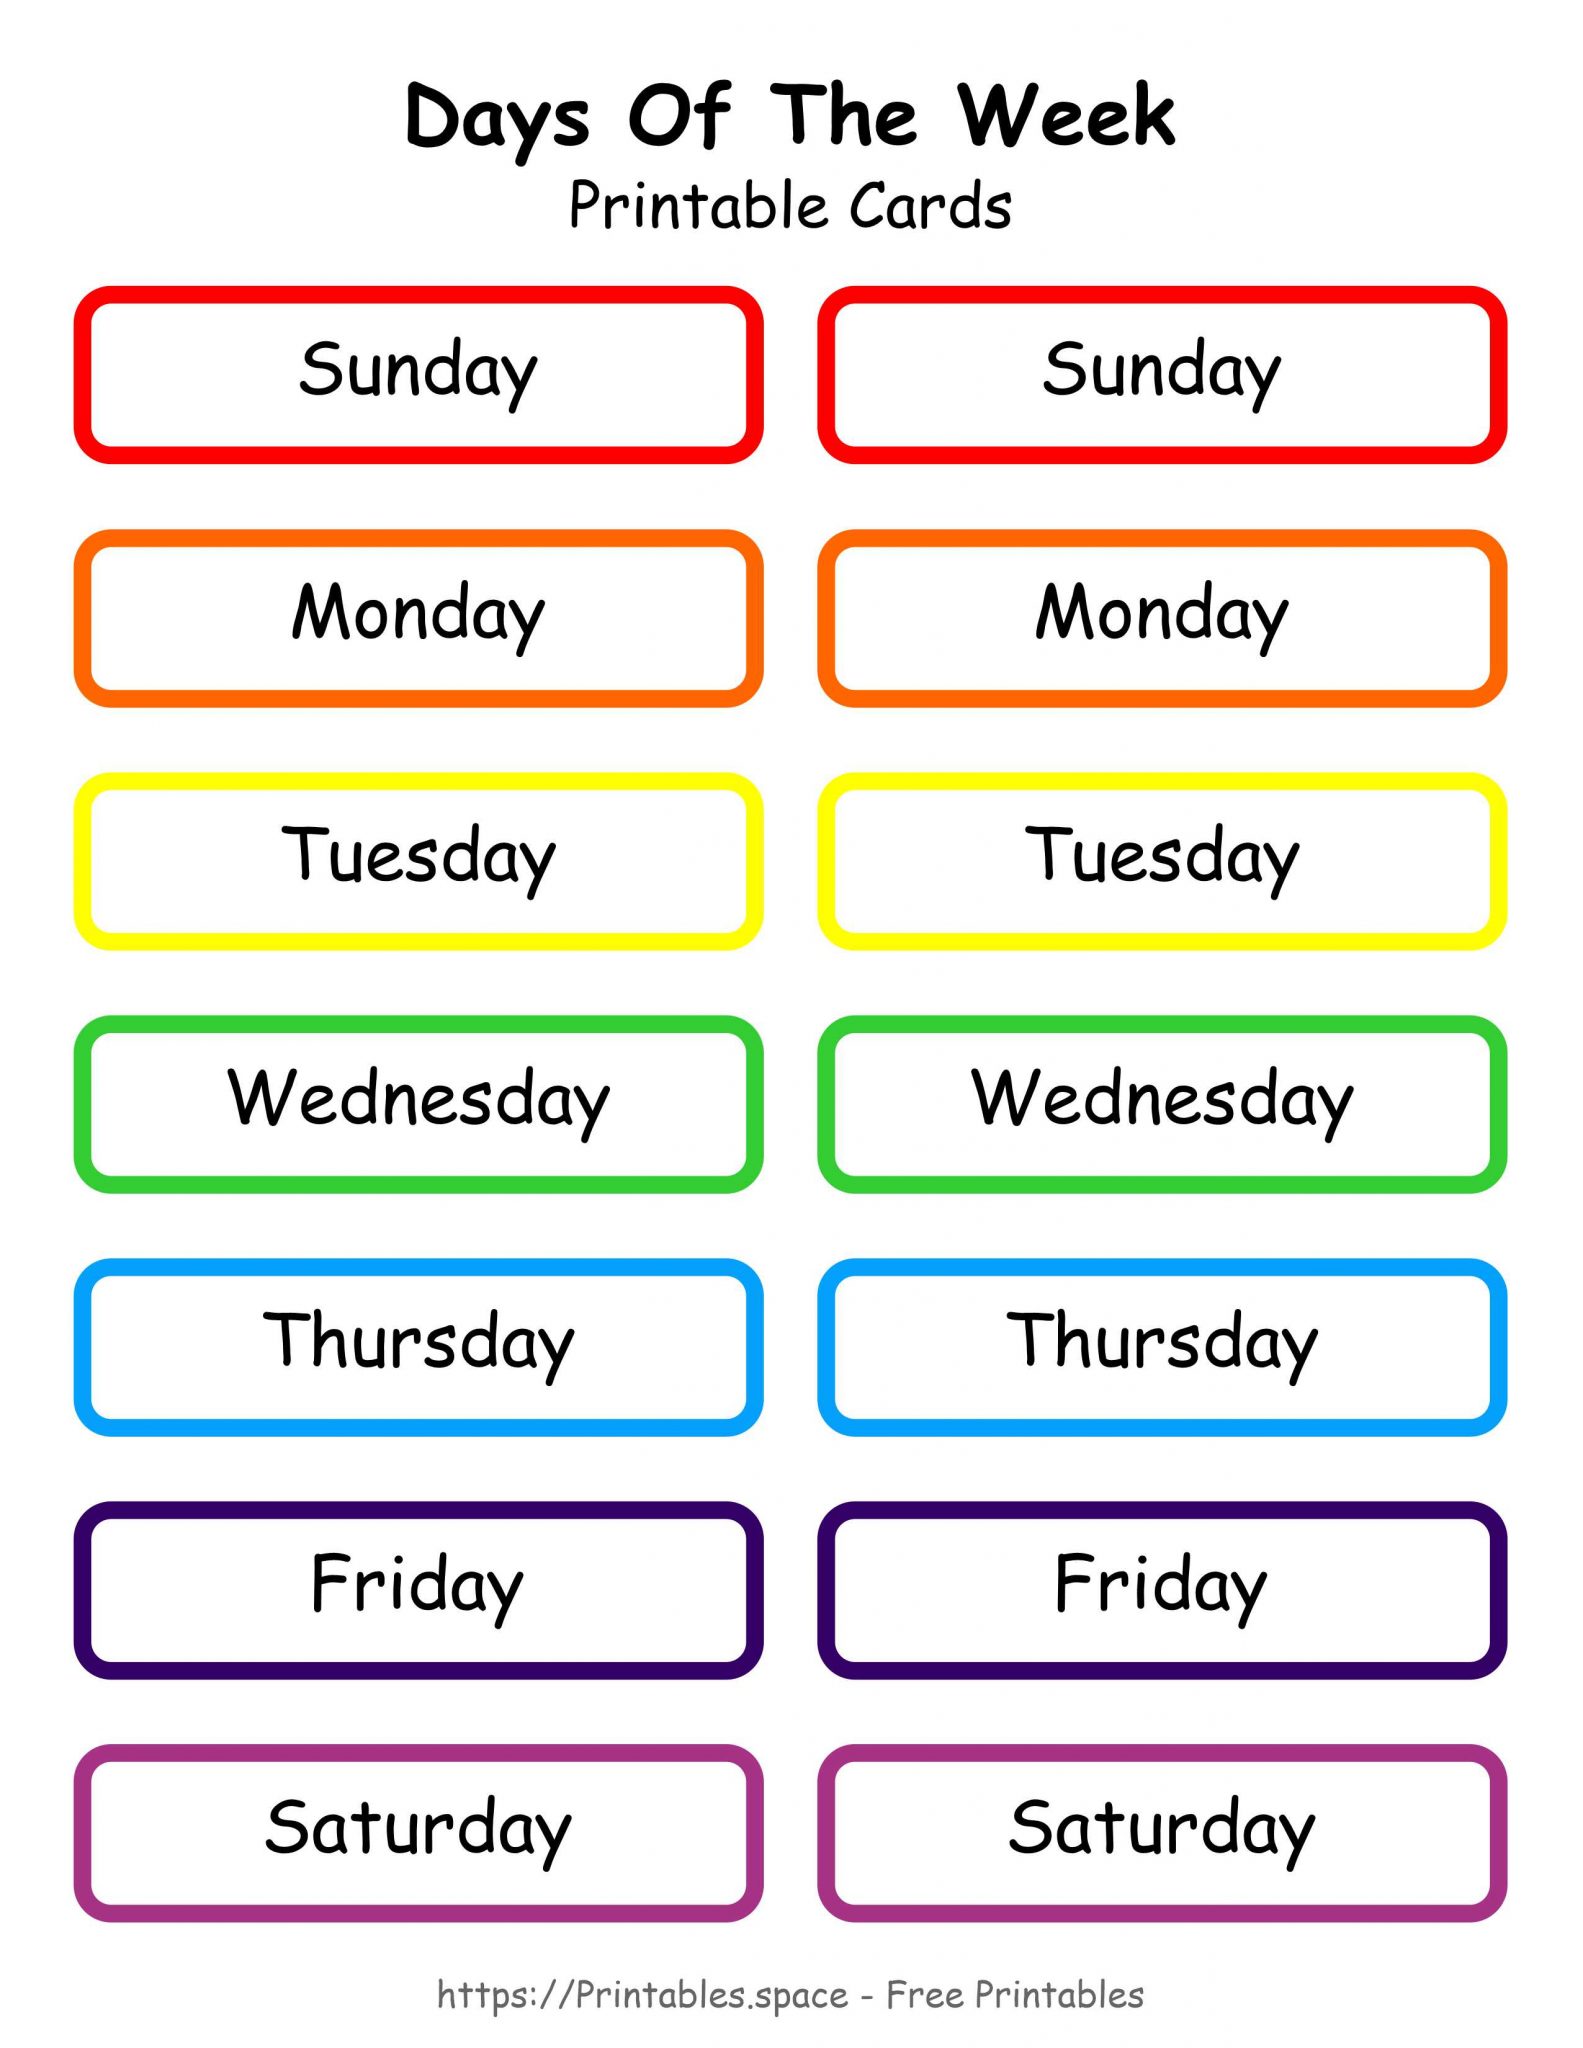 Printable Days Of The Week To Do List